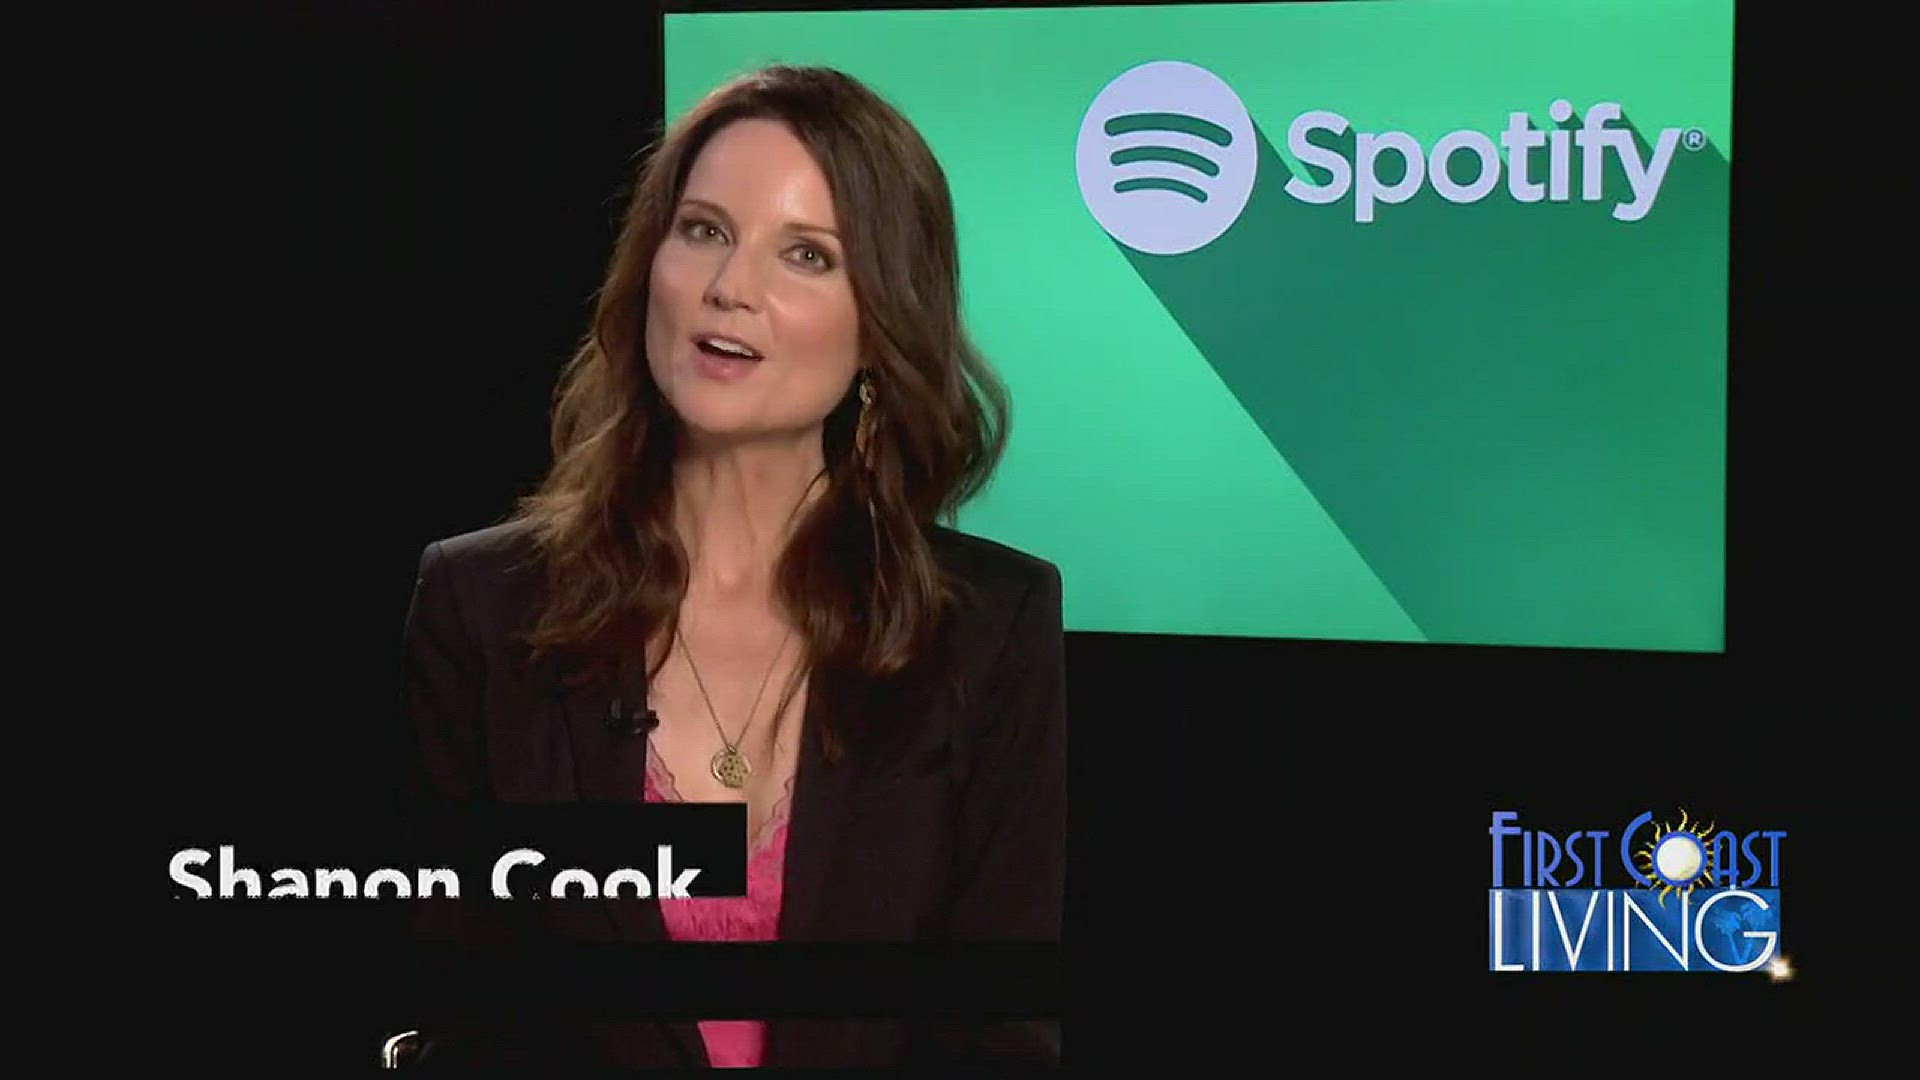 Shanon Cook Talks Trends with Spotify